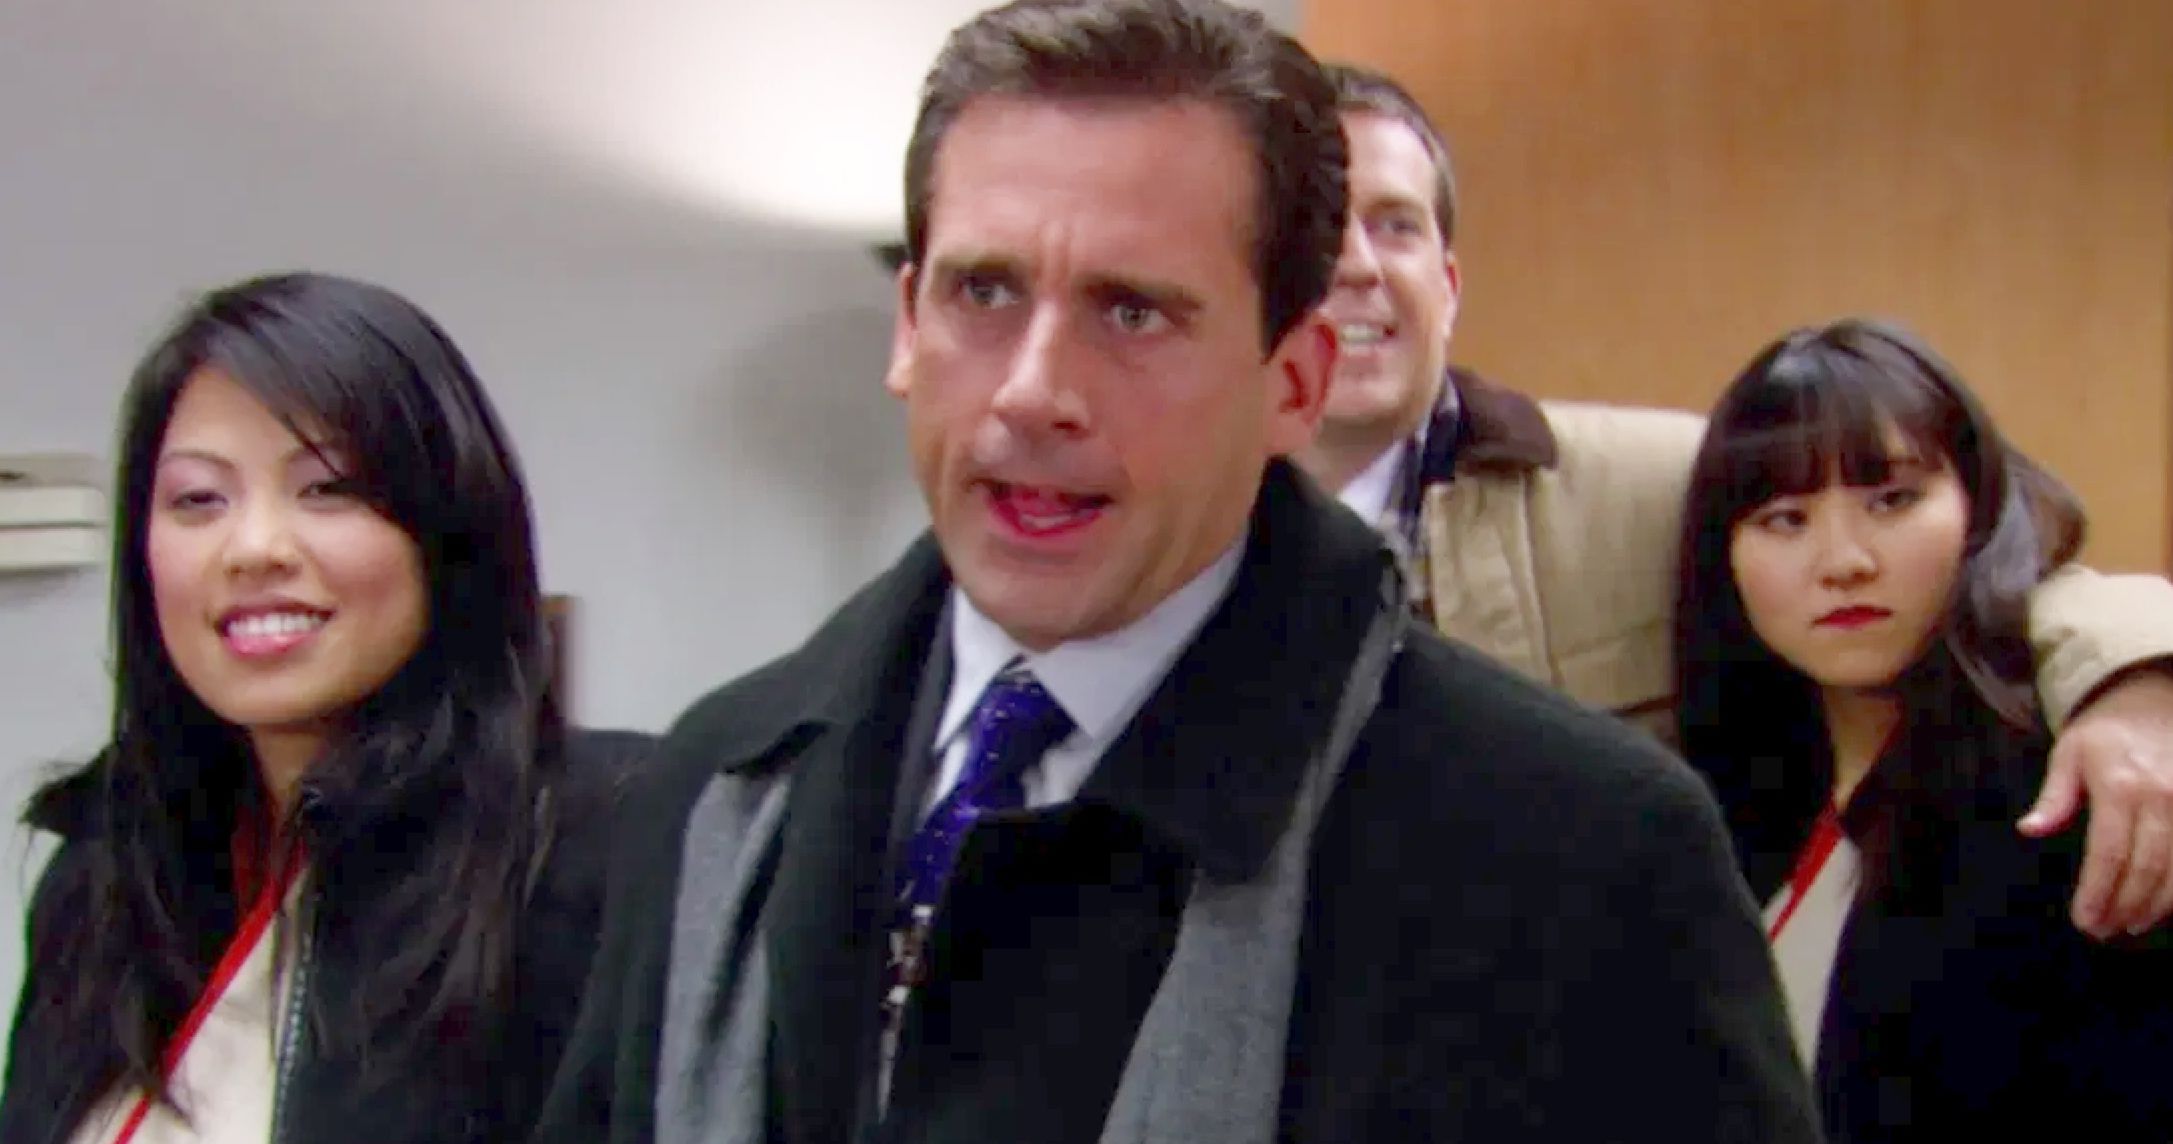 The Office Called Out for Problematic Portrayal of Asian Women by Guest Star Kat Ahn